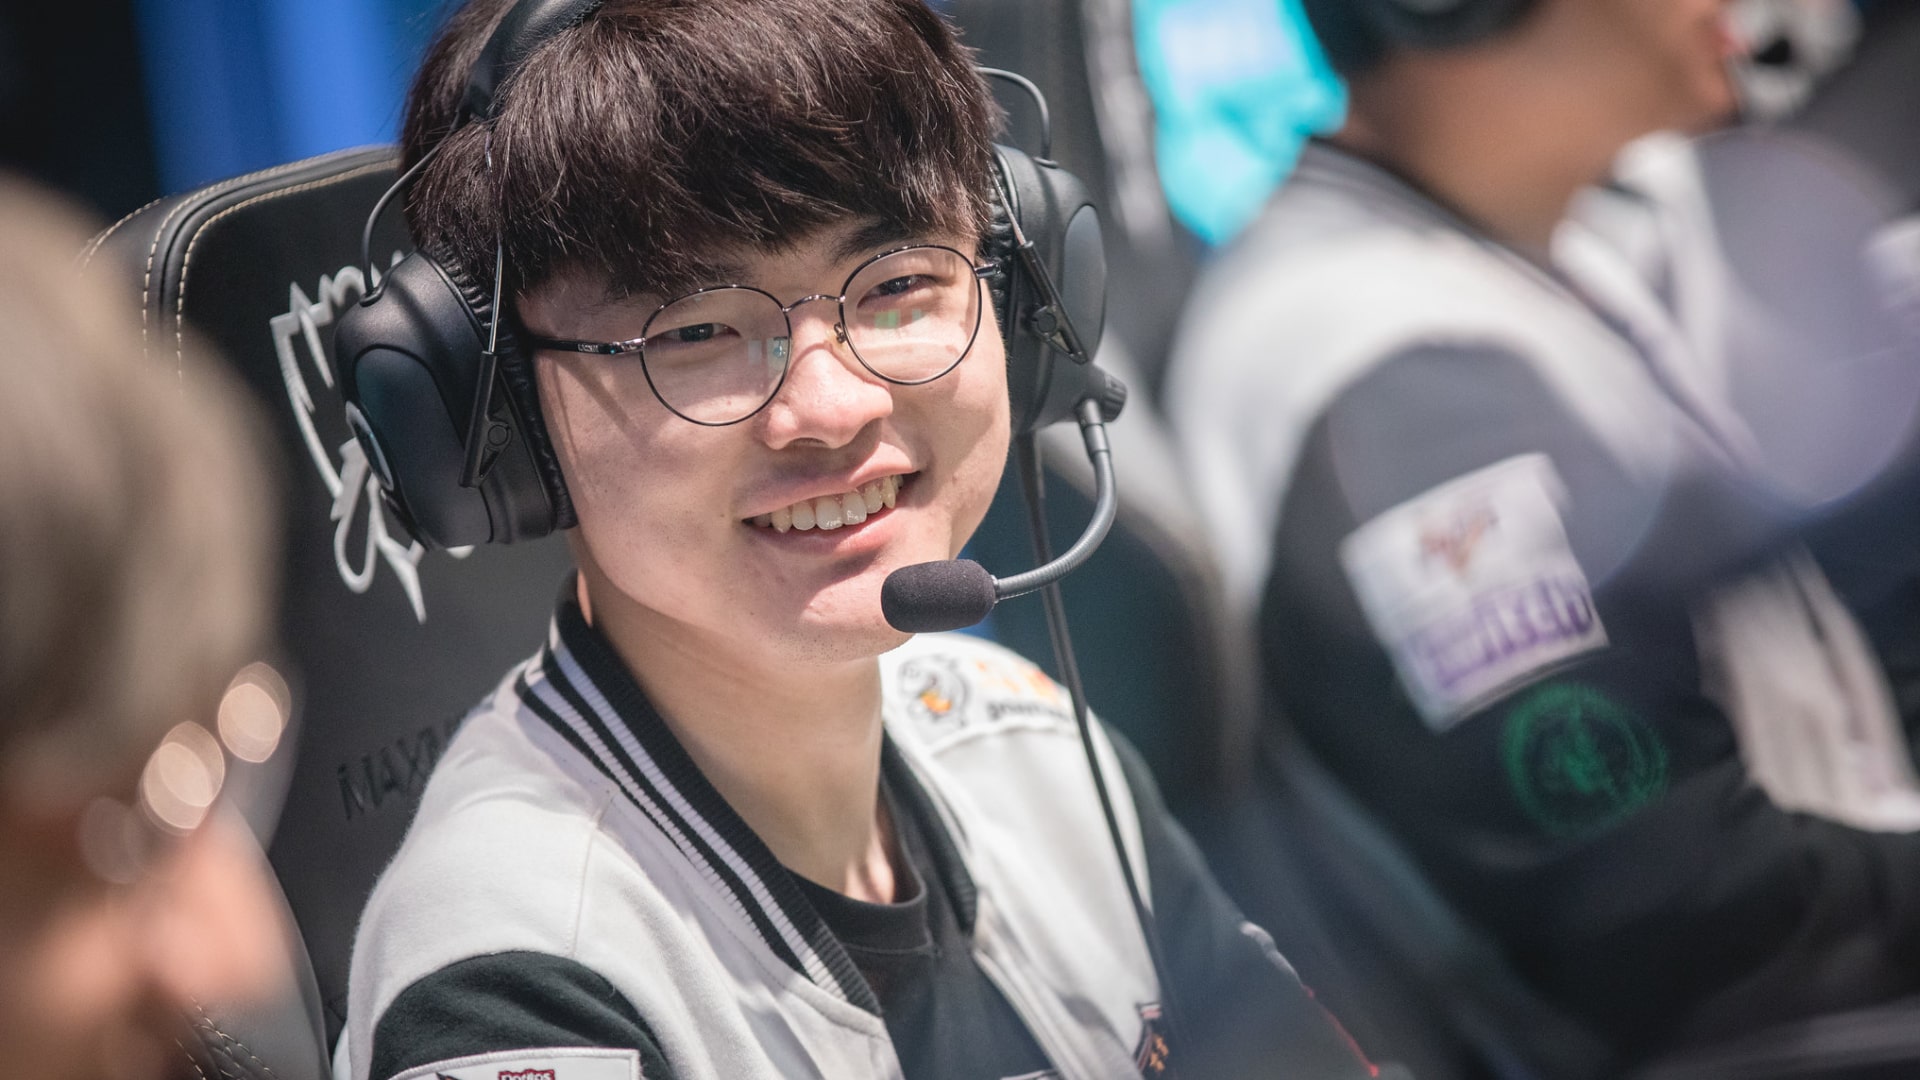 His Team is Losing, but He's Smiling! [Faker Stream Highlight] 